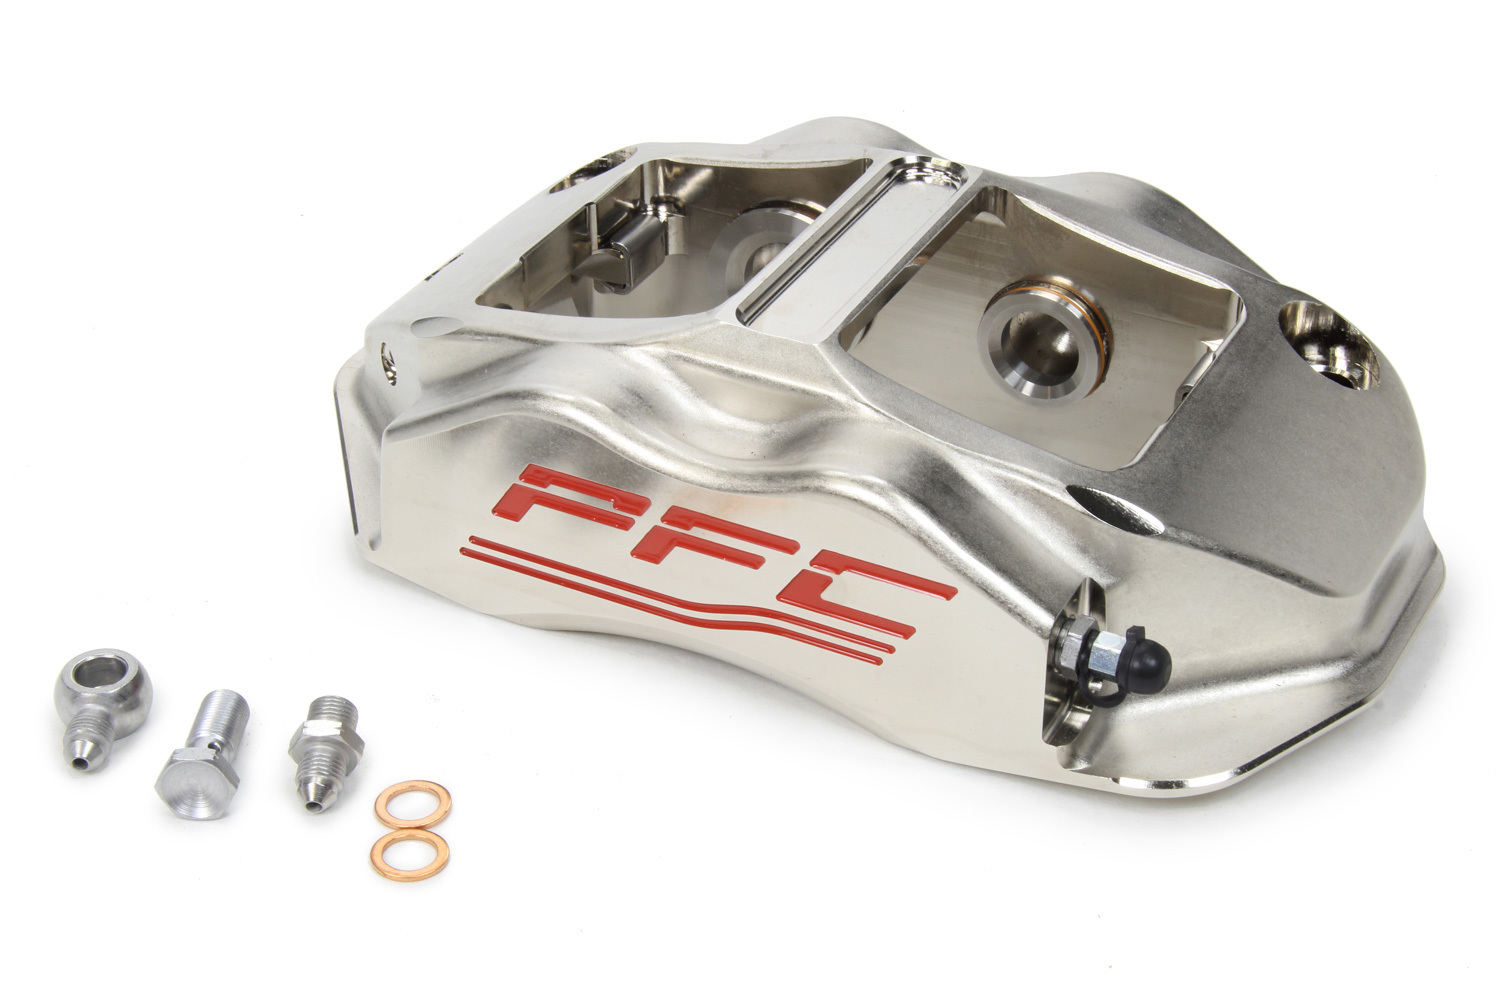 Performance Friction 94.323.290.365.01 Brake Caliper, ZR94, Driver Side, Leading, 4 Piston, Aluminum, Nickel Plated, 12.716 in OD, 1.250 in Thick Rotor, 7.00 Radial Mount, Each